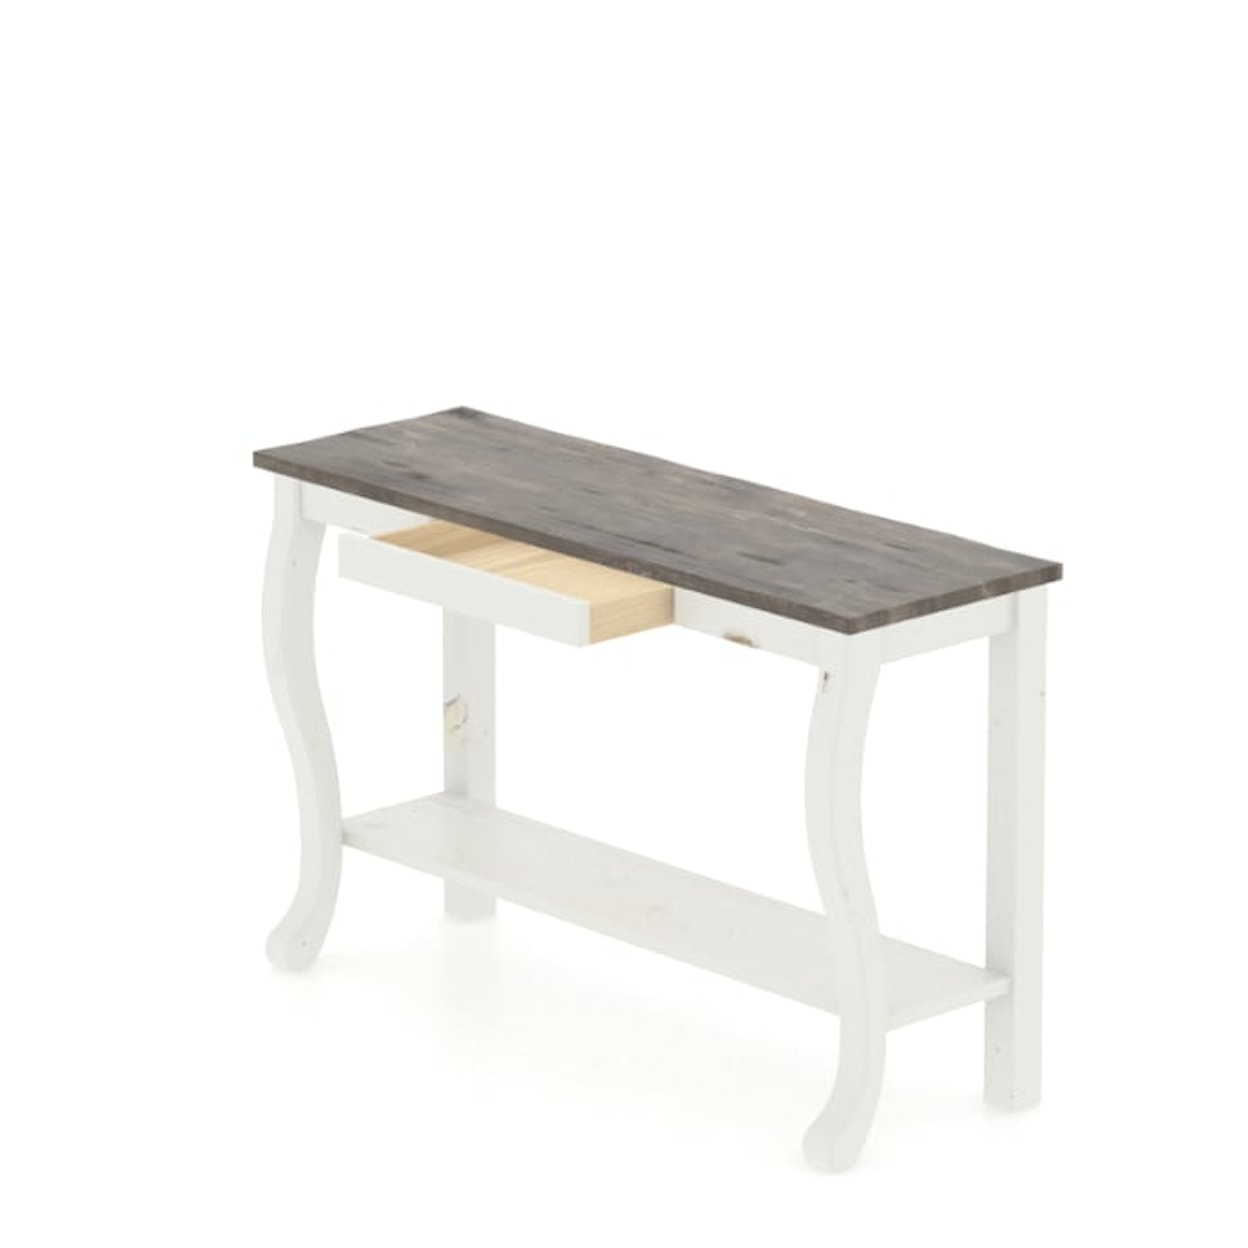 Canadel Canadel Living CONSOLE TABLE 1648